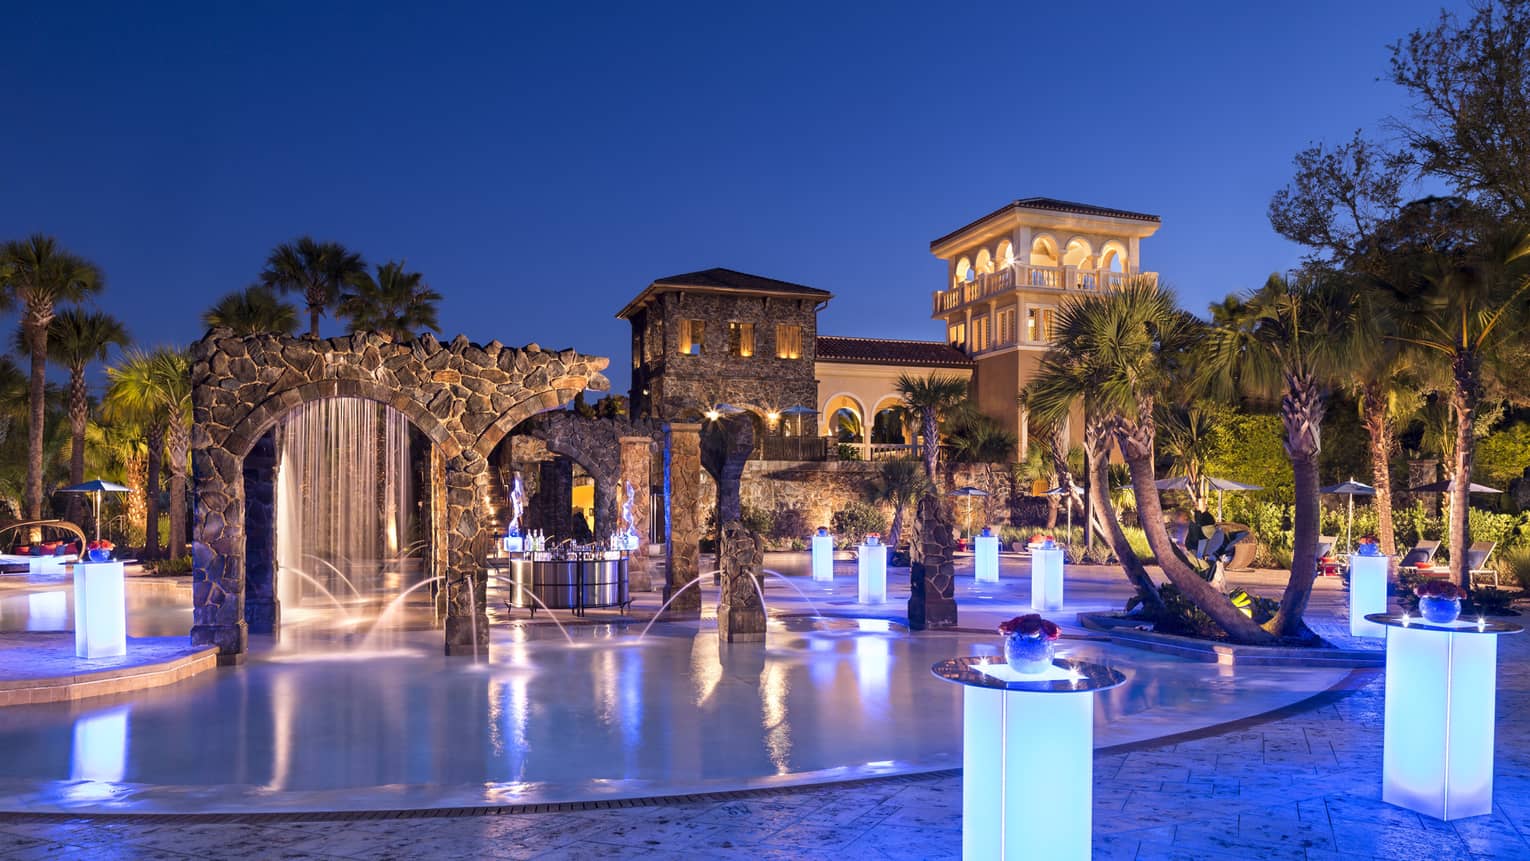 Blue glowing tables illuminate an outdoor bar area with palm trees and water fountains